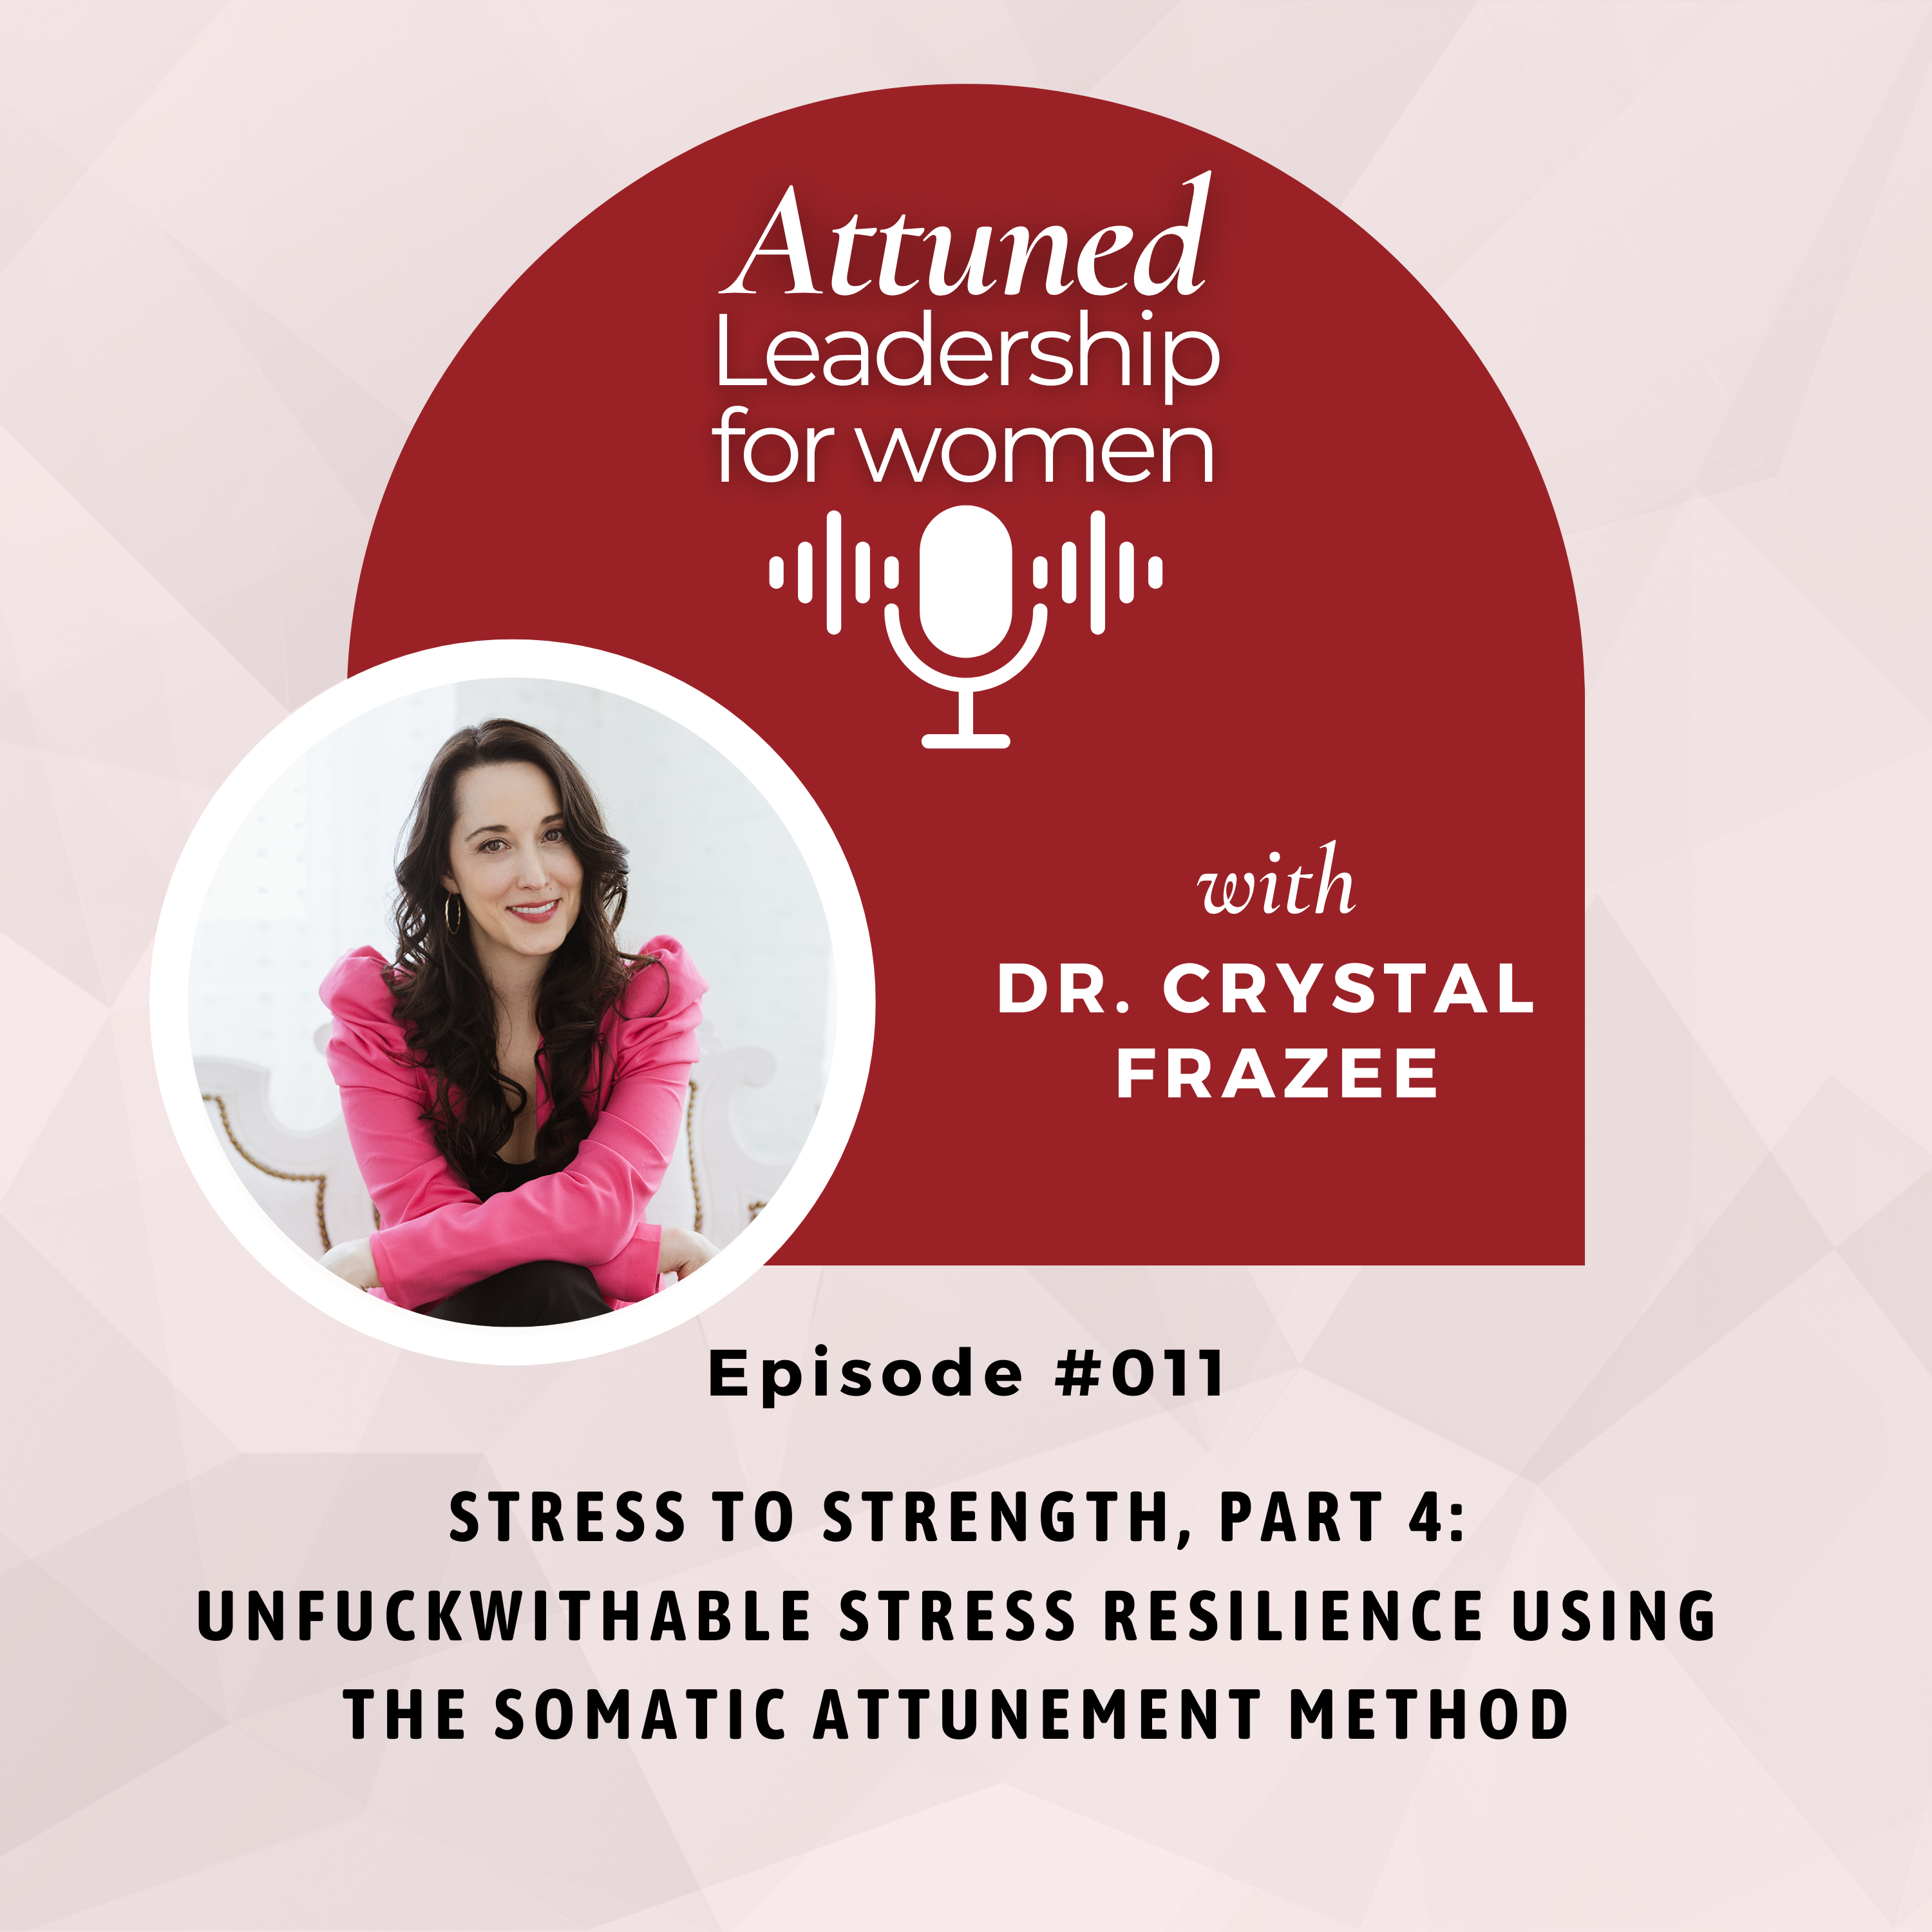 Dr. Crystal Frazee on Stress Resilience for Women Leaders